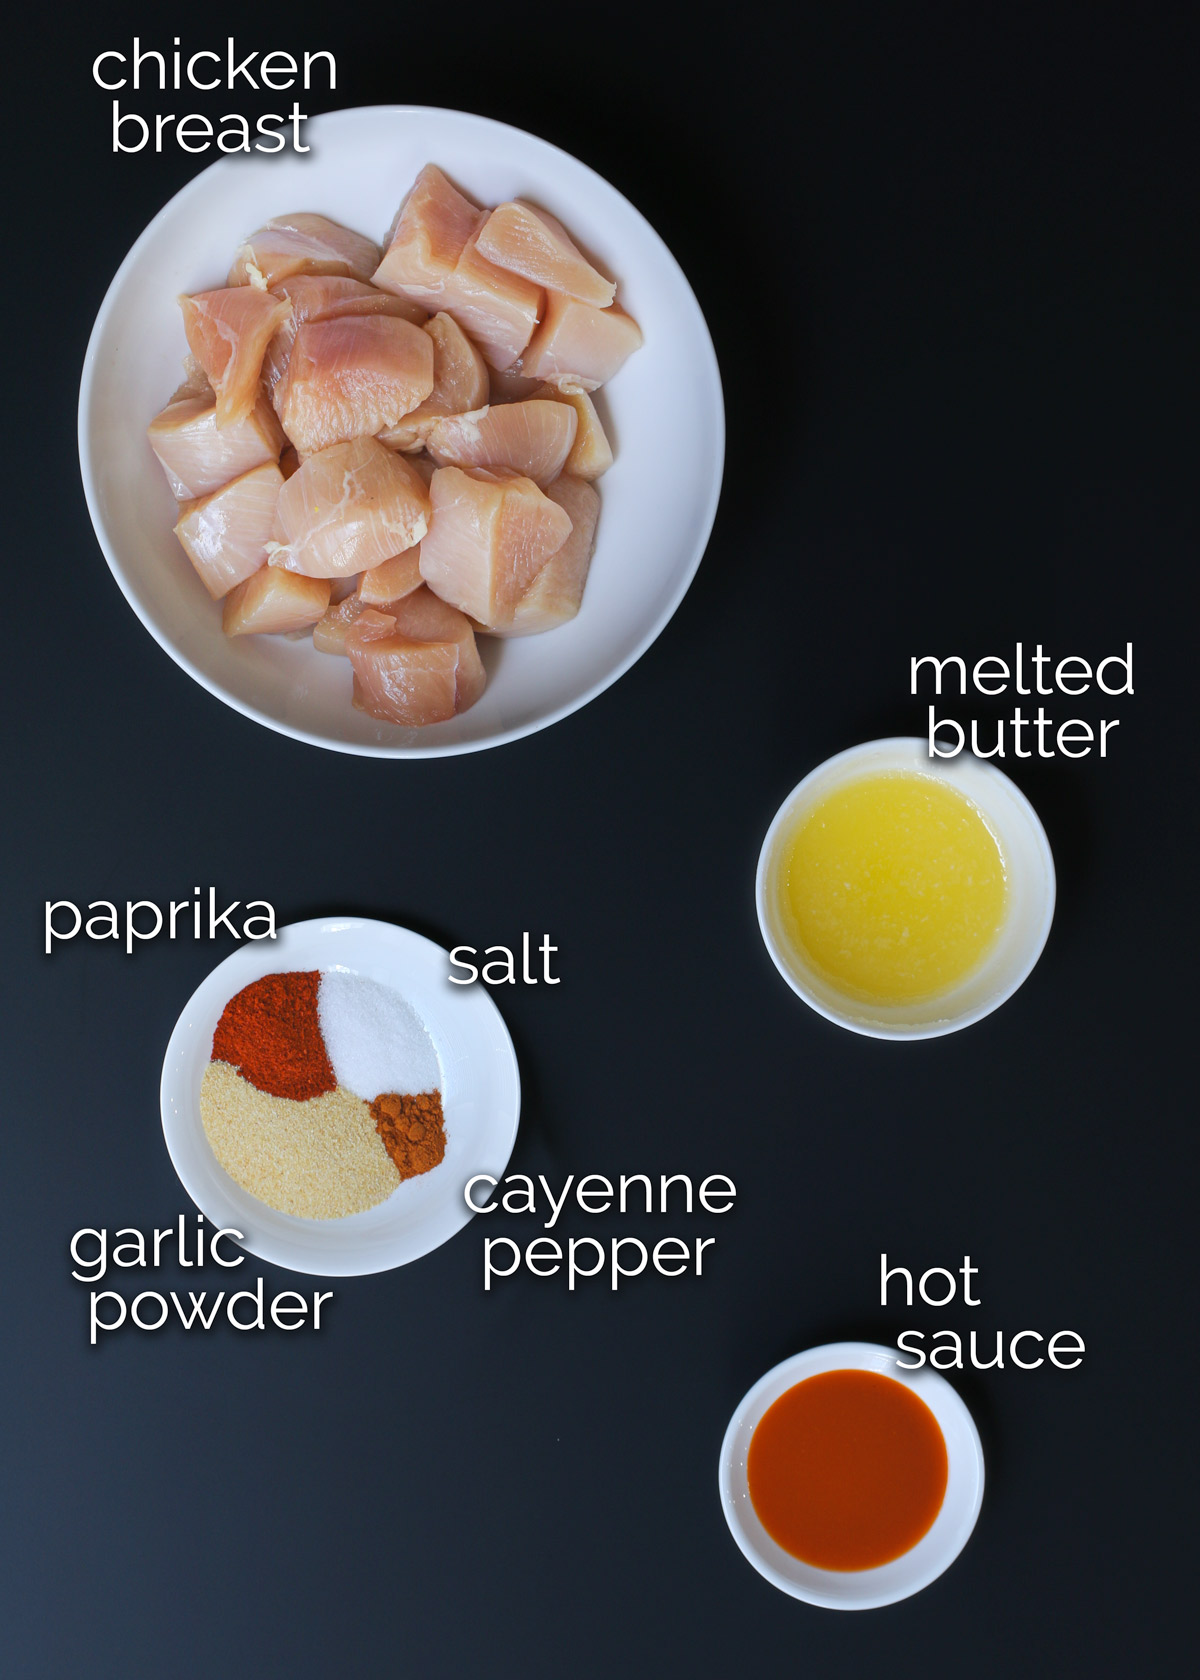 ingredients for buffalo chicken bites laid out on a table.